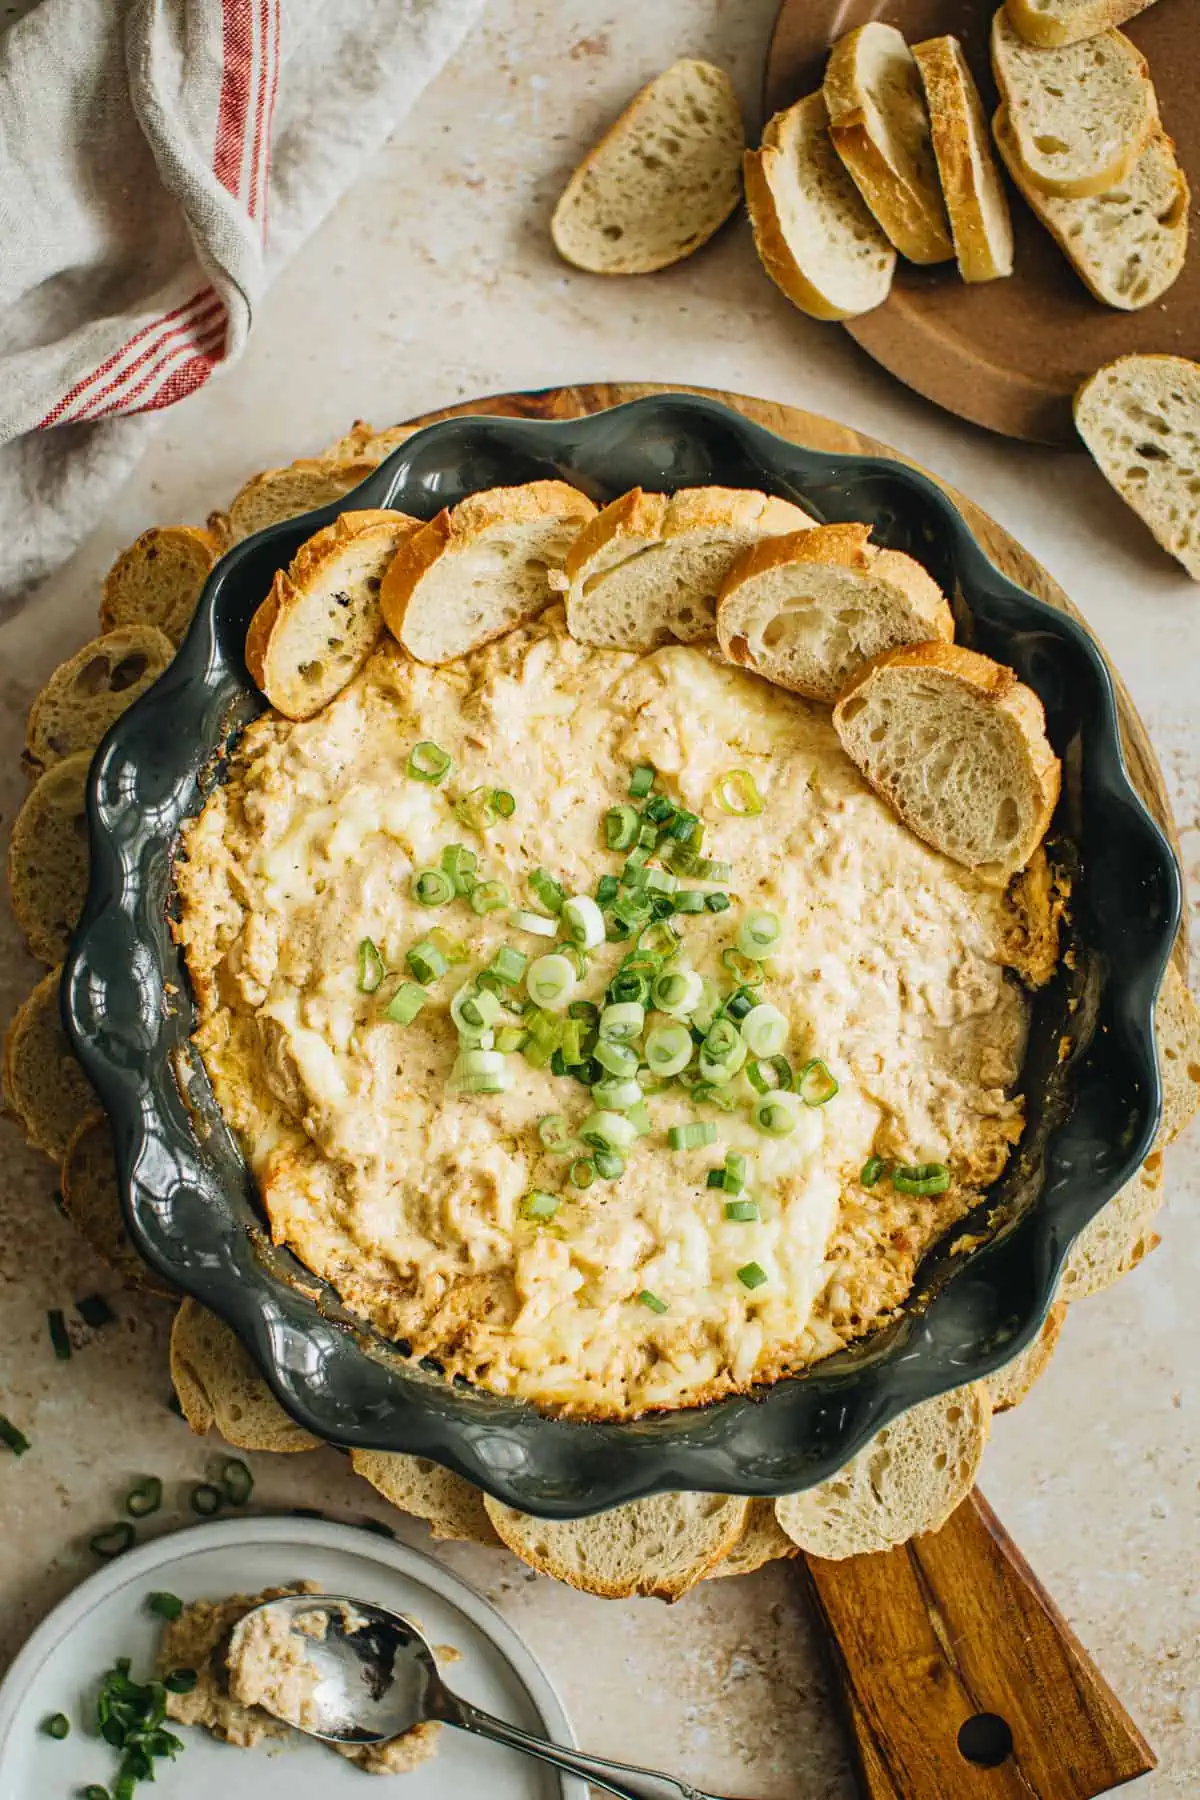 Crab dip topped with green onions in a pie dish with baguette slices around it.